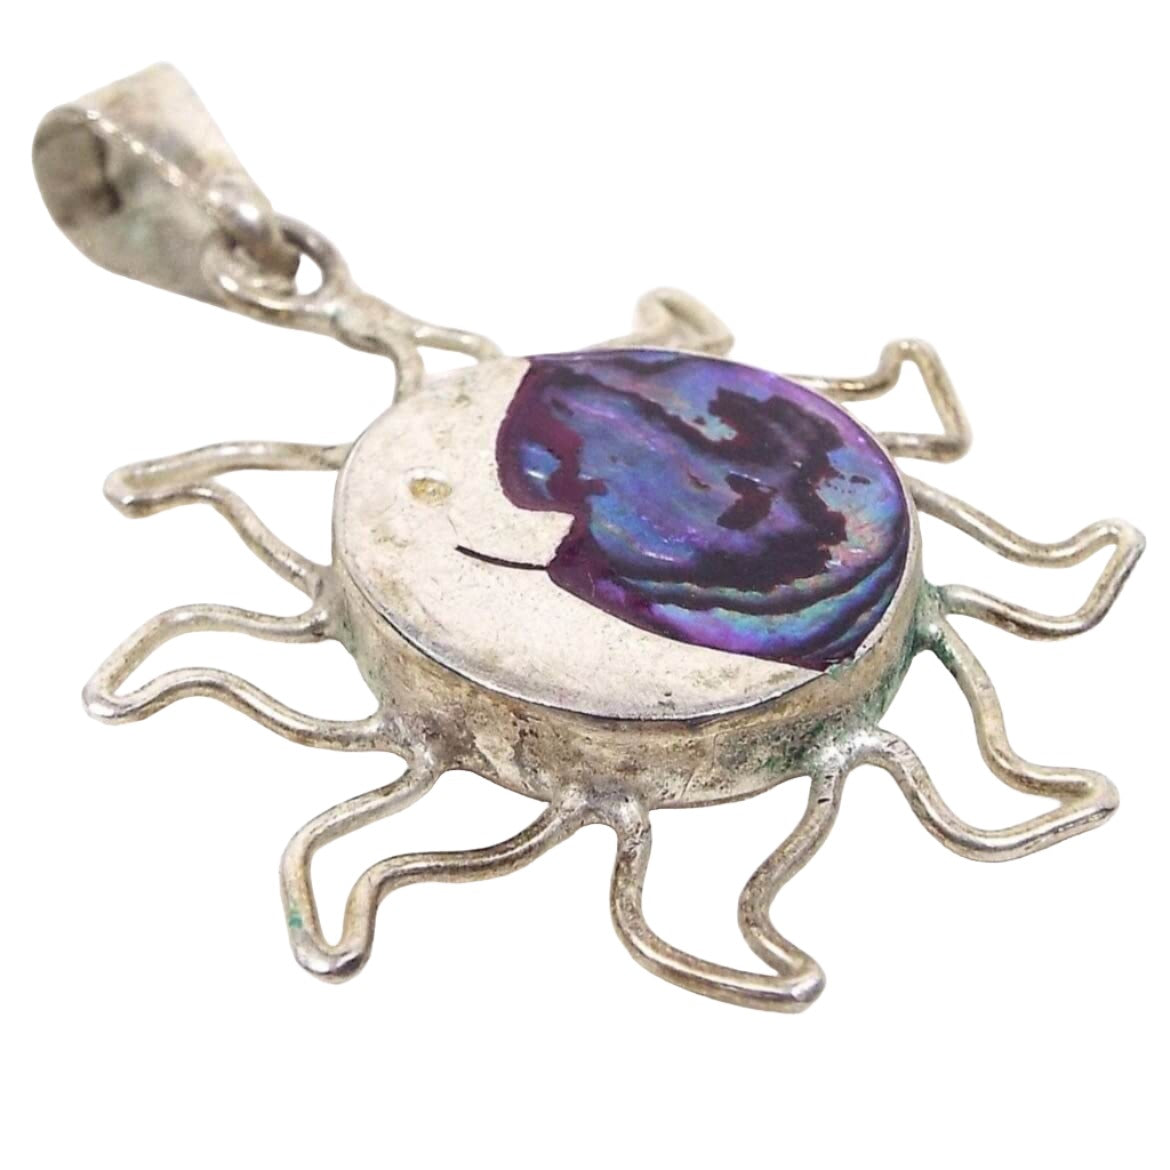 Front view of the retro vintage Mexican sterling pendant. The sterling is slightly darkened from age. The main area in the middle is round with a bezel and has open wire style flames to represent the sun part of the pendant. The inside of the circle has a moon shape on the left with a dot for an eye and a half smile and the other side has inlaid abalone shell. The abalone shell has marbled and swirled colors in blues and purples that have flashes of color as you move around. There is a bail at the top.